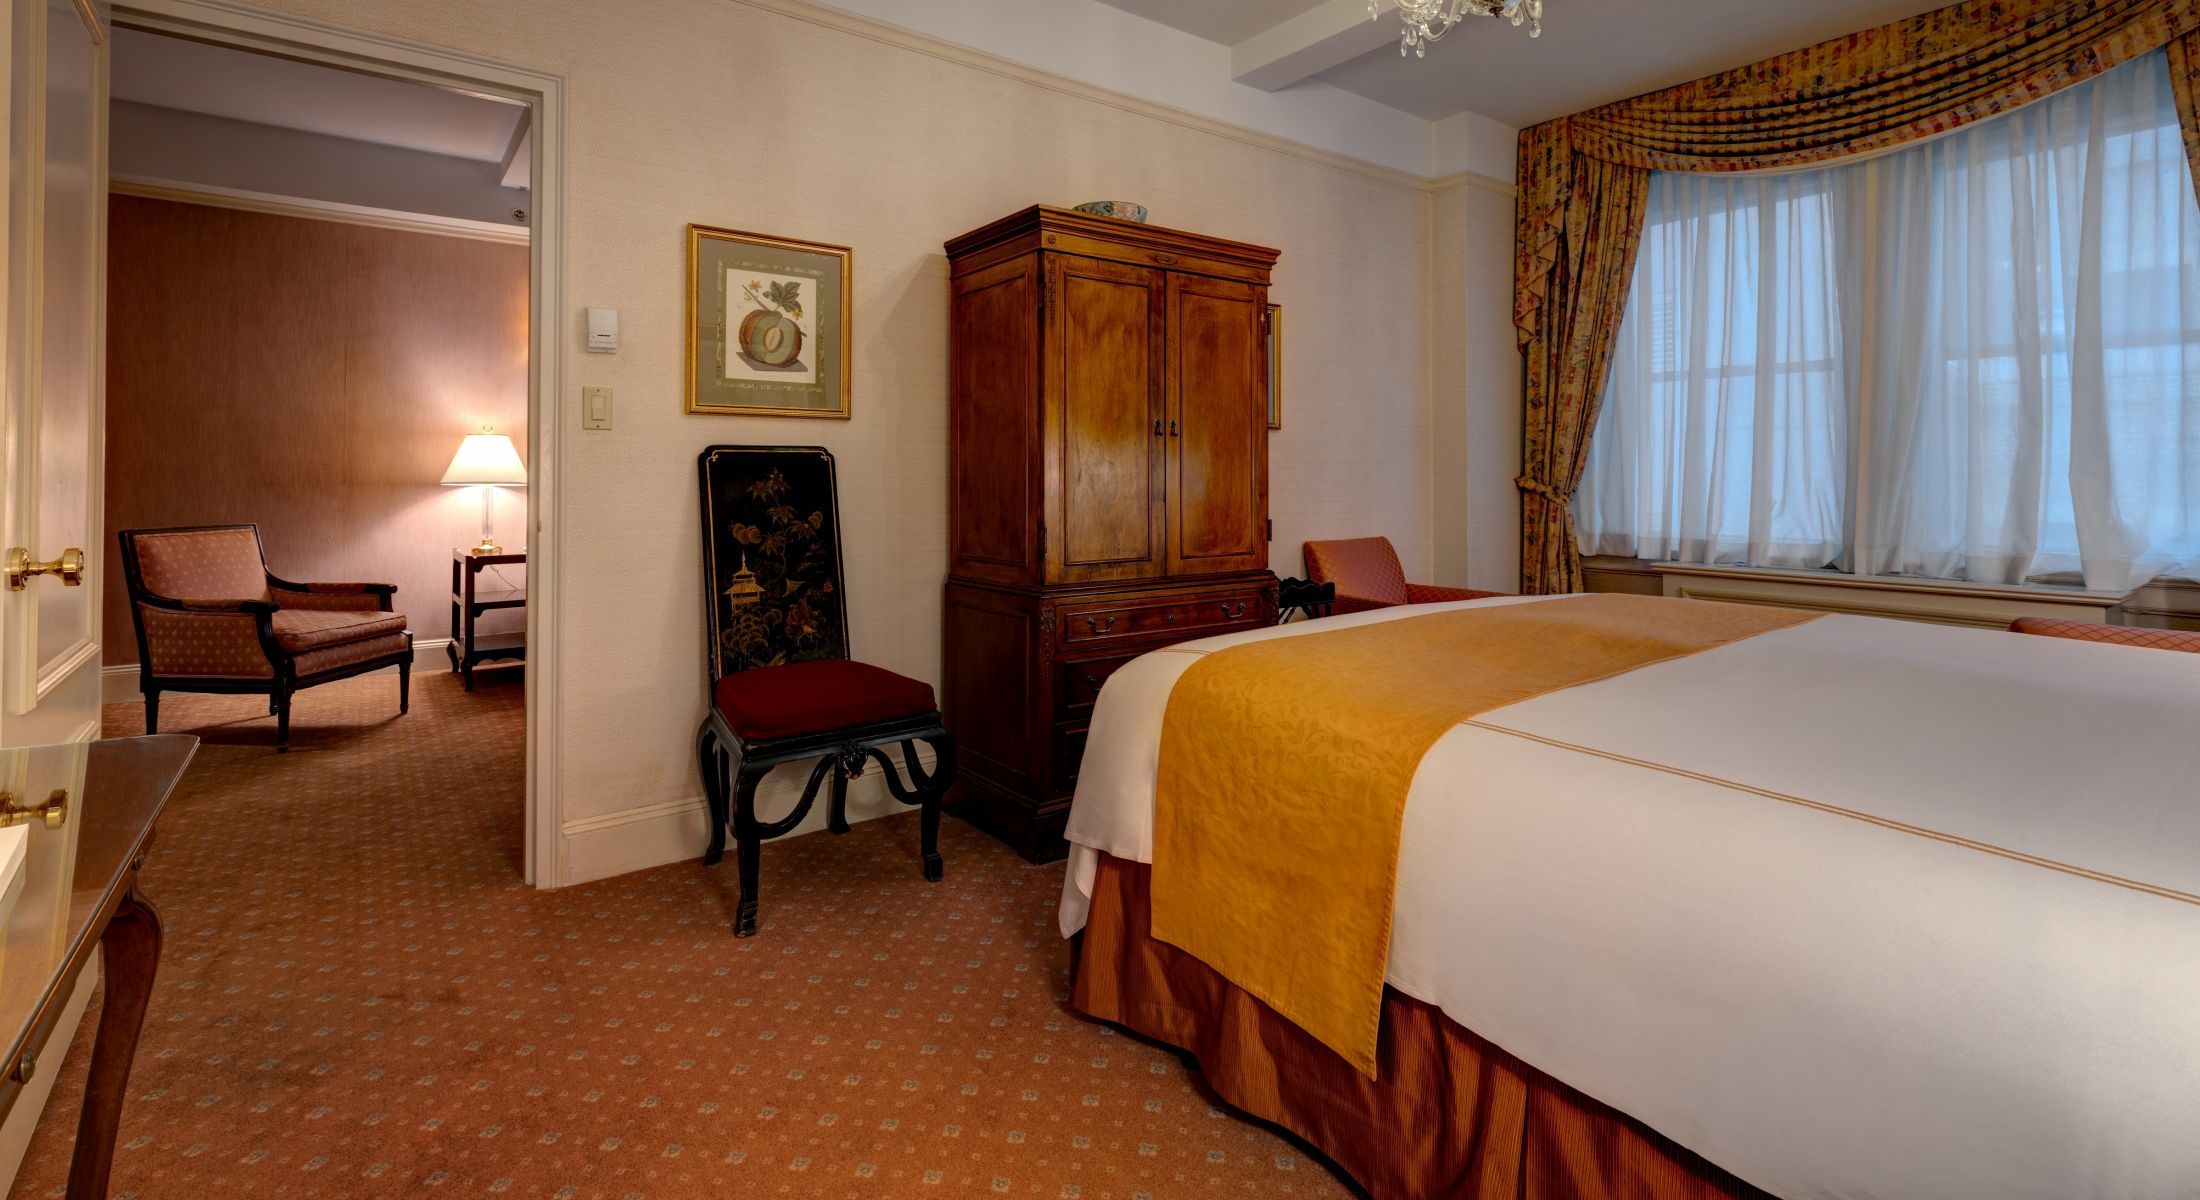 Bedroom of the King Suite at the Hotel Elysee with king bed and armoire.